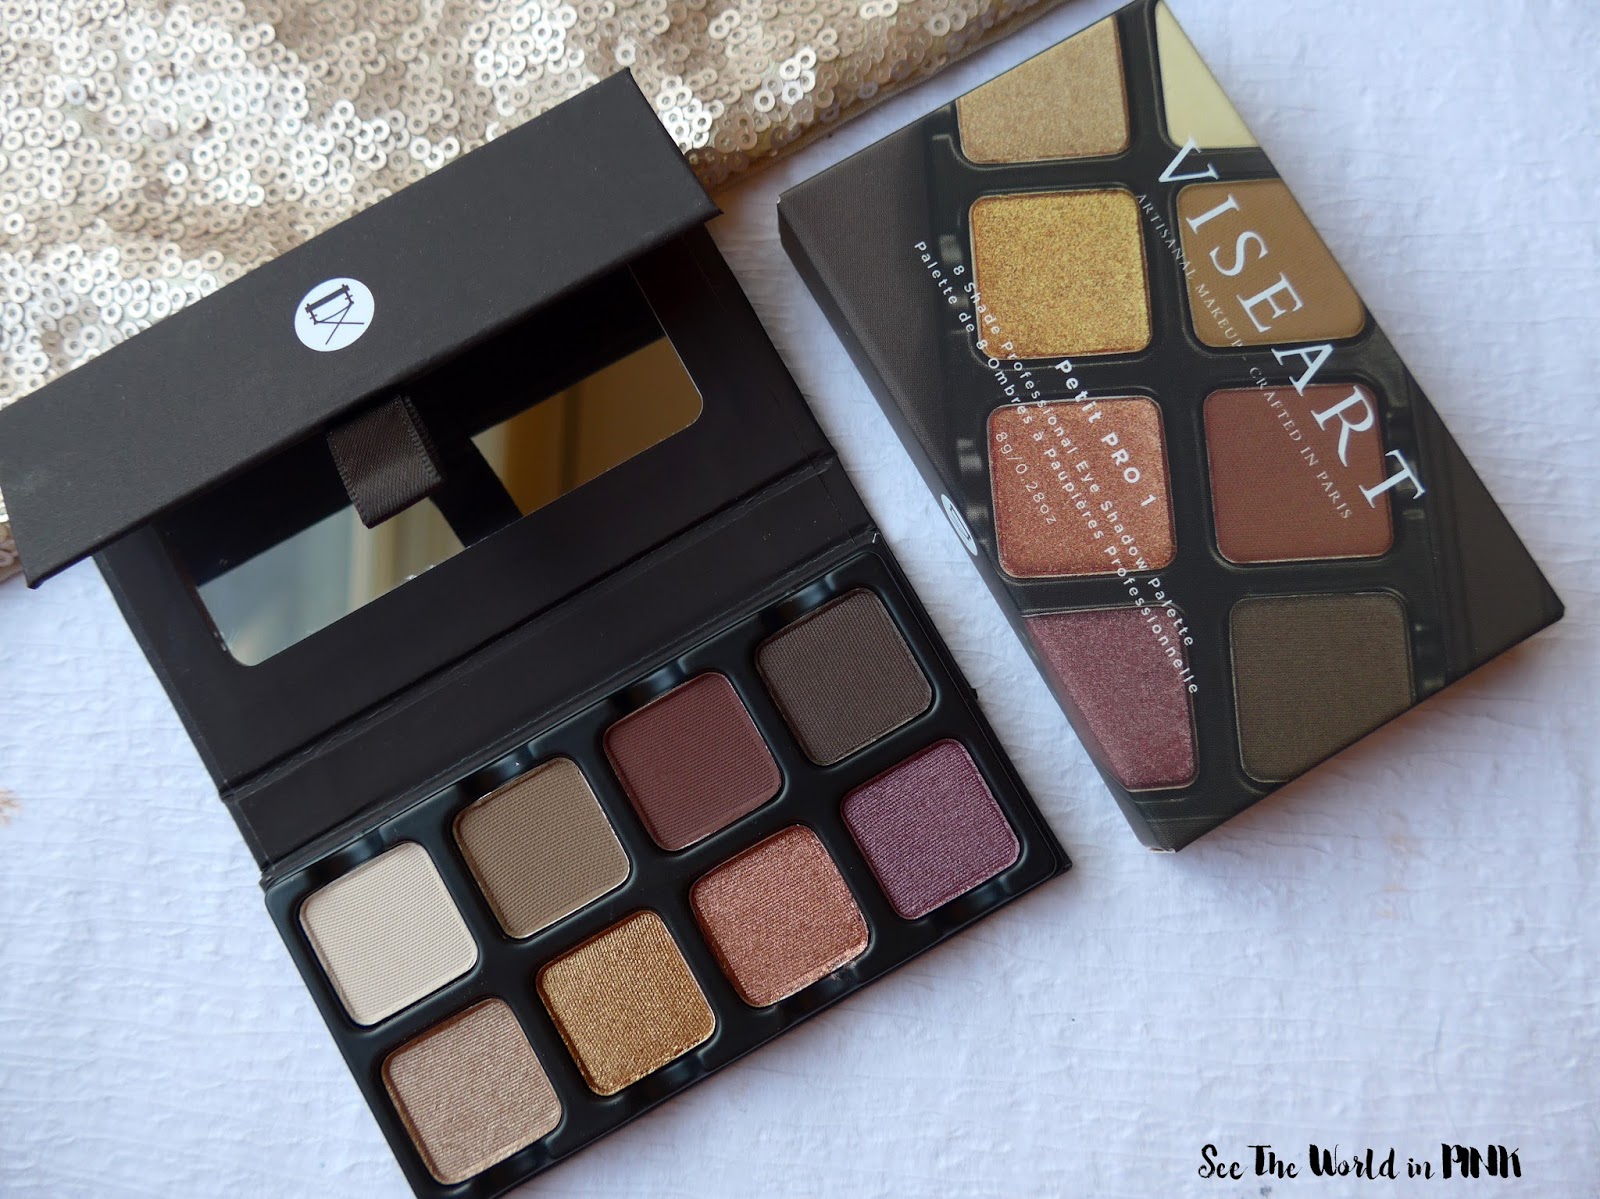 Viseart Petit Pro 1 Eyeshadow Palette - Review, Swatches and Makeup Look! 